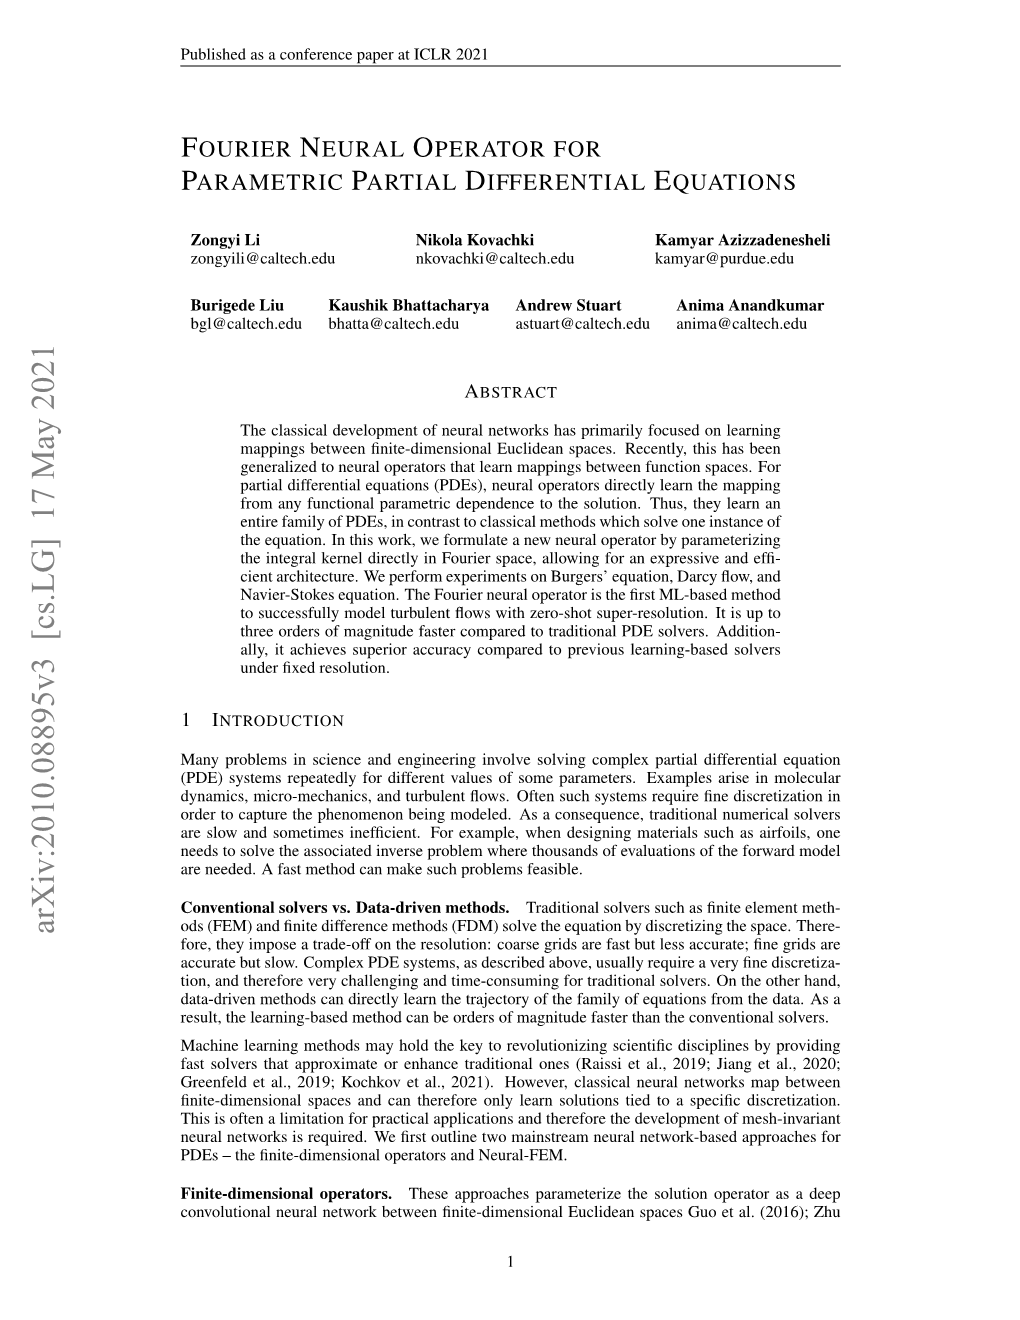 Fourier Neural Operator for Parametric Partial Differential Equations